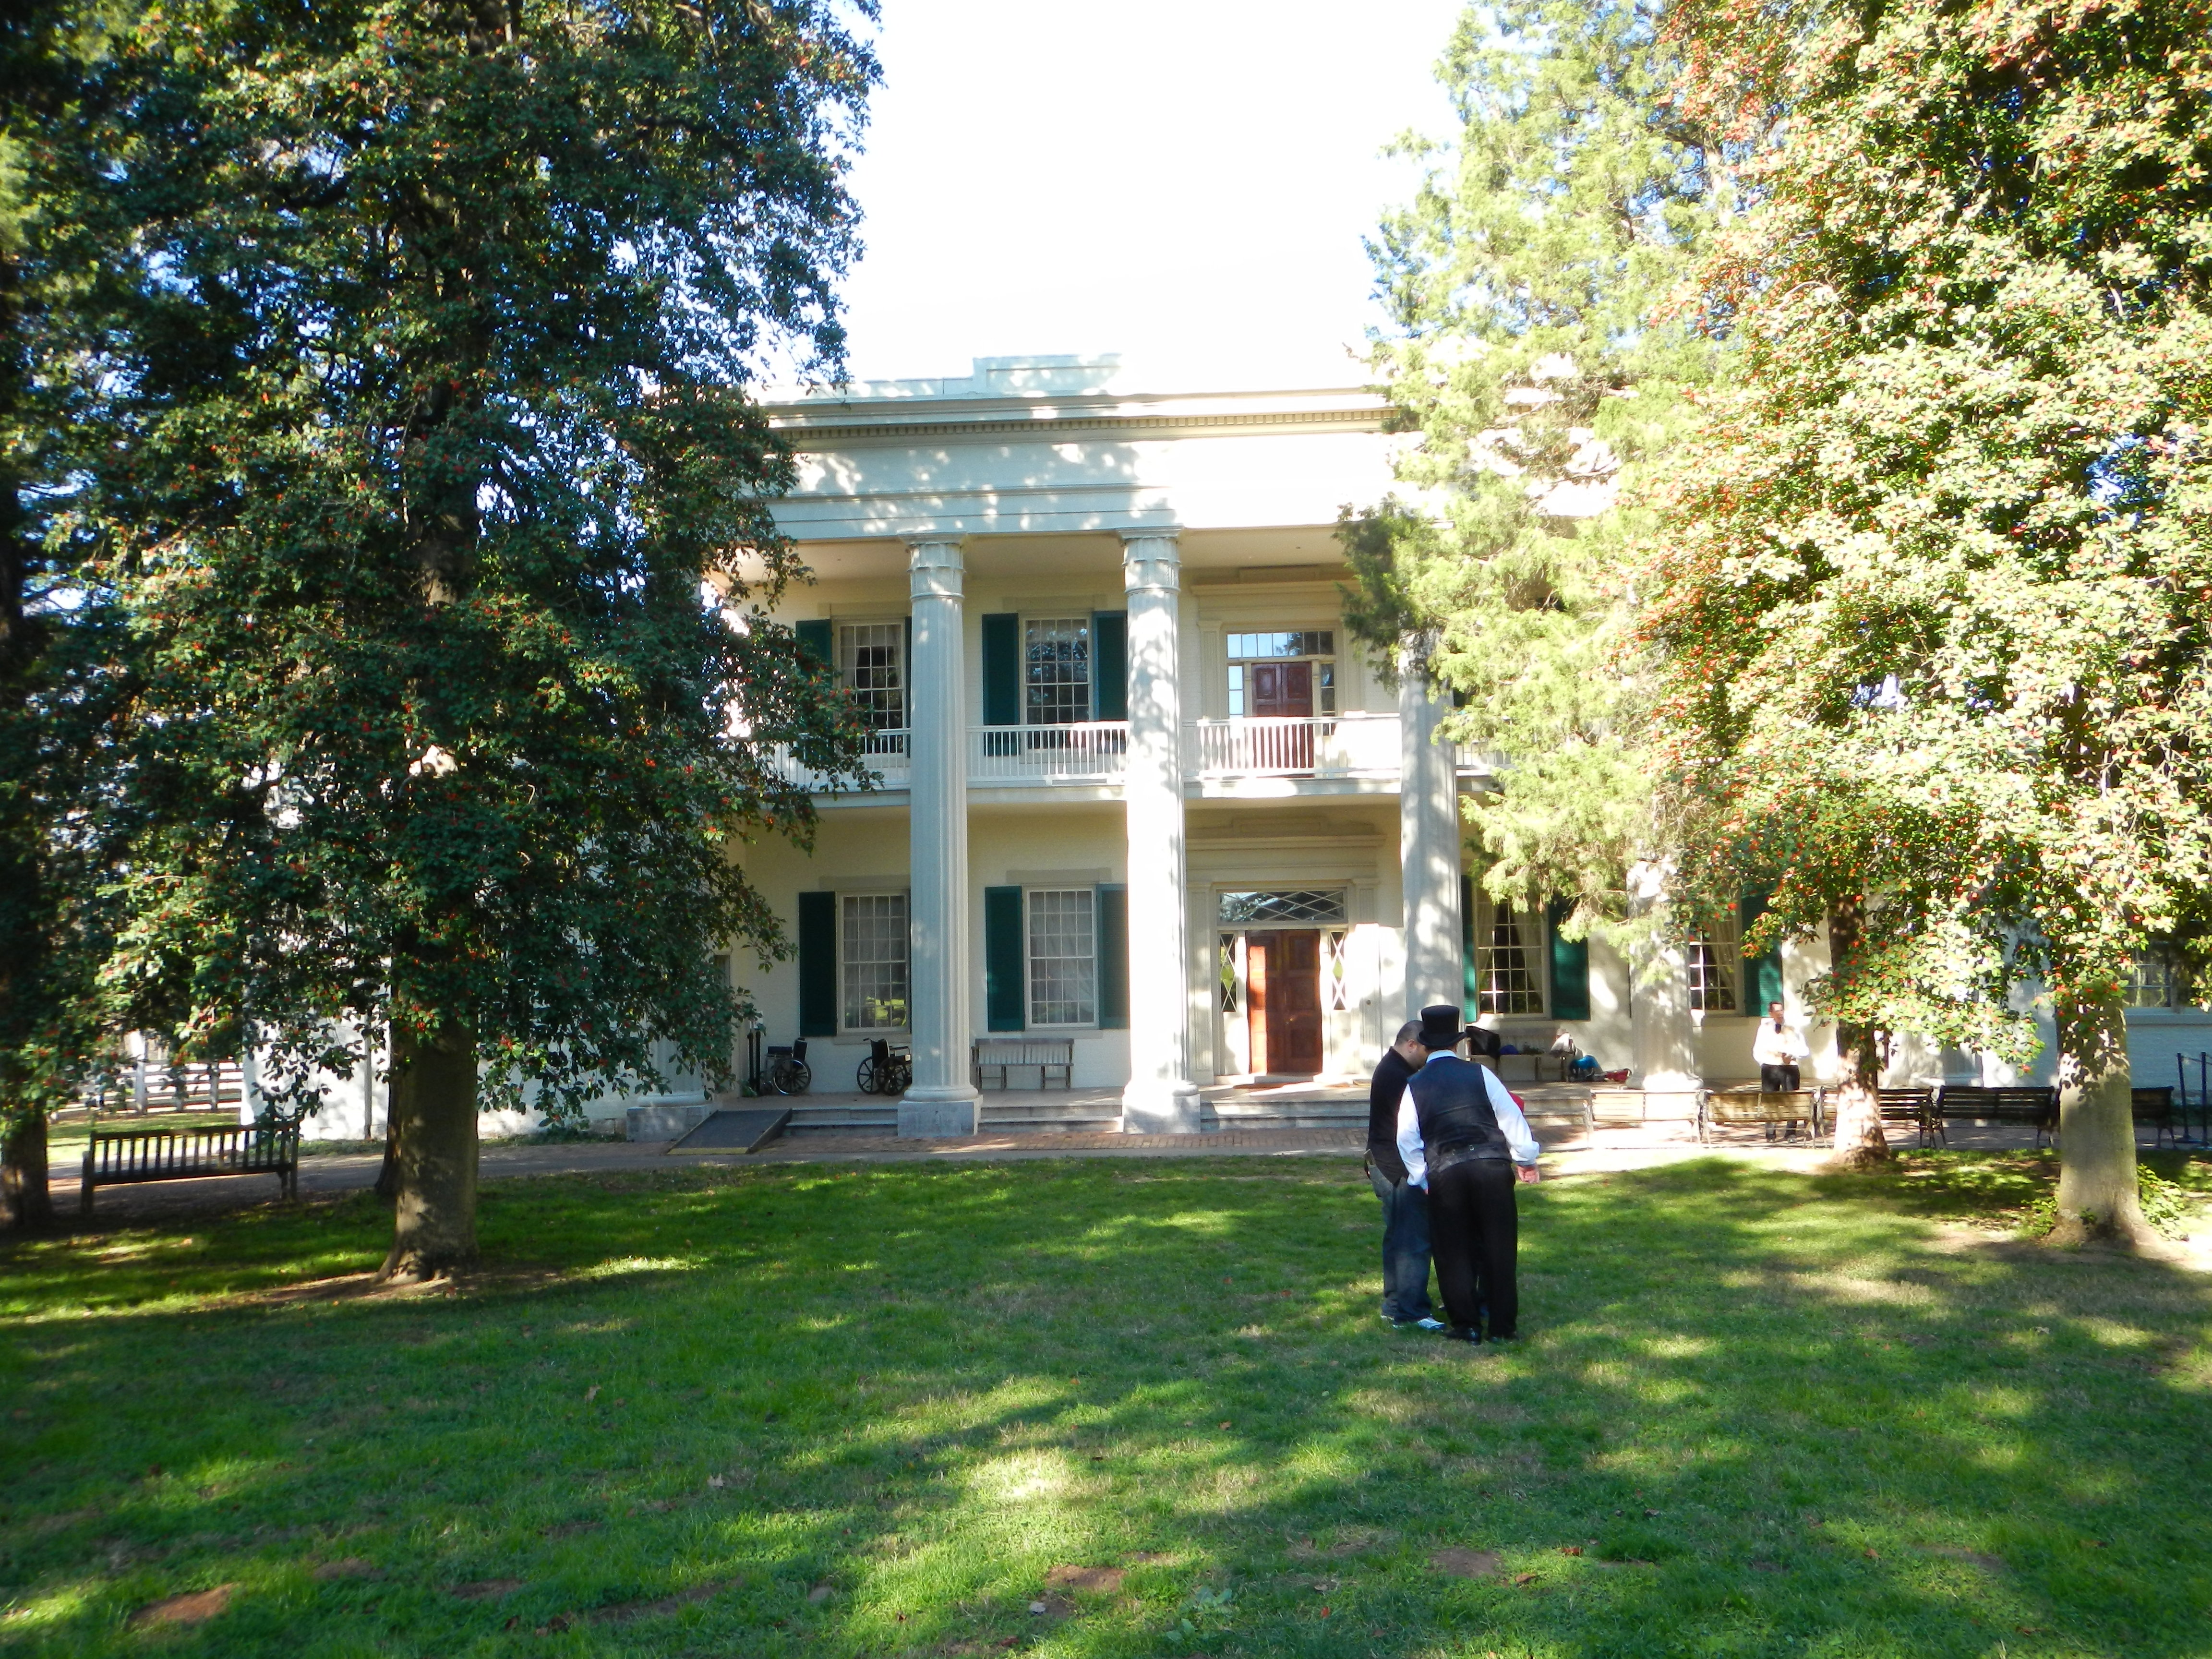 Here's the front of the Hermitage Mansion.